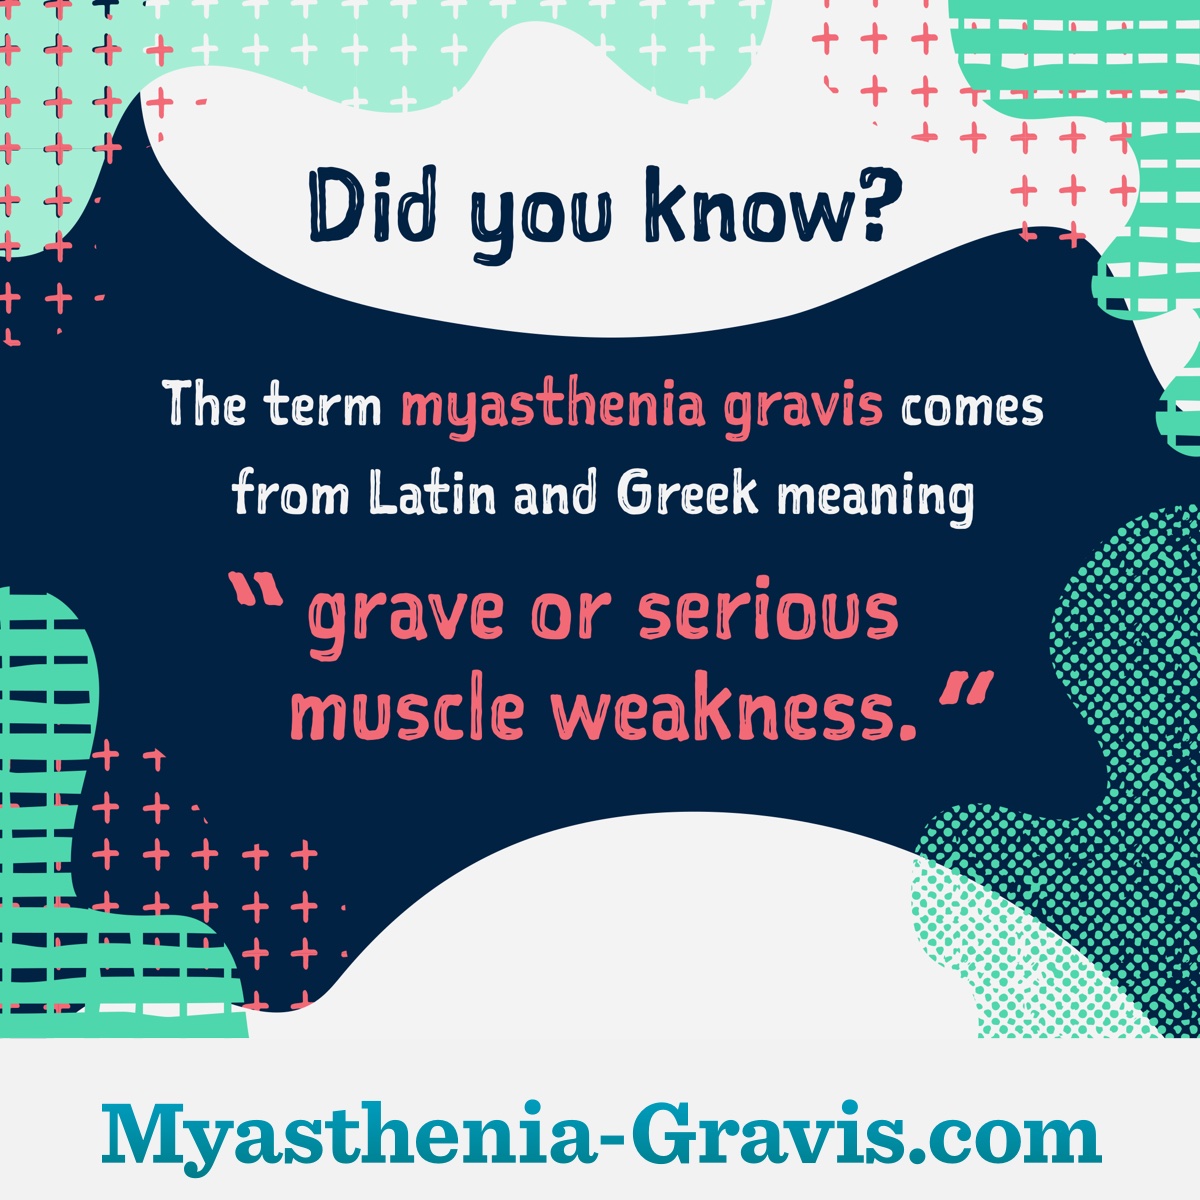 Text about the origin and definition of the term myasthenia gravis.